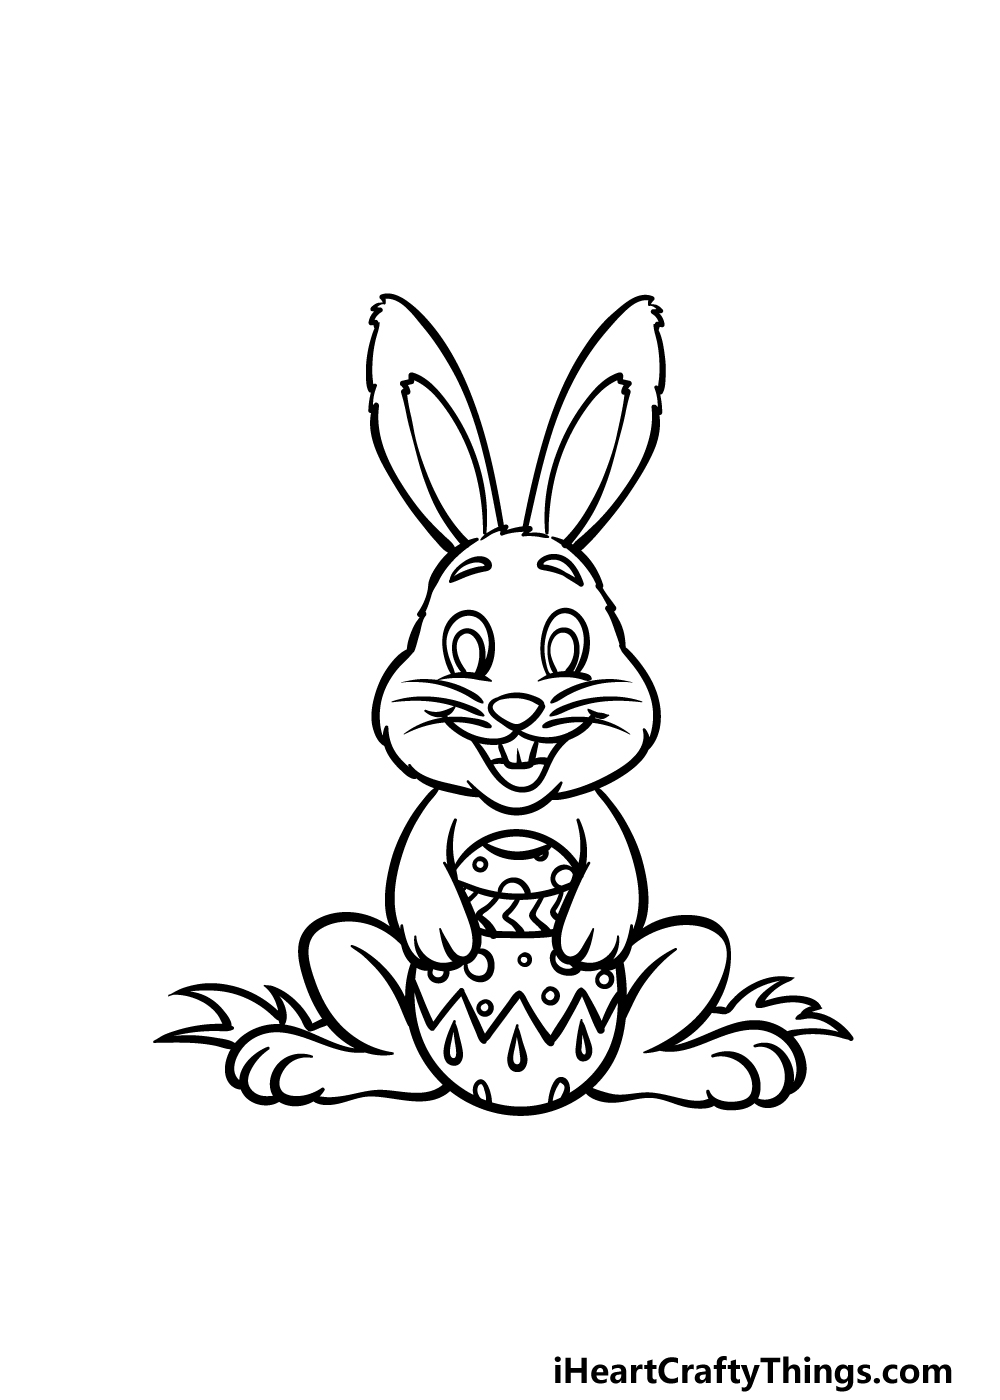 Draw an easter bunny